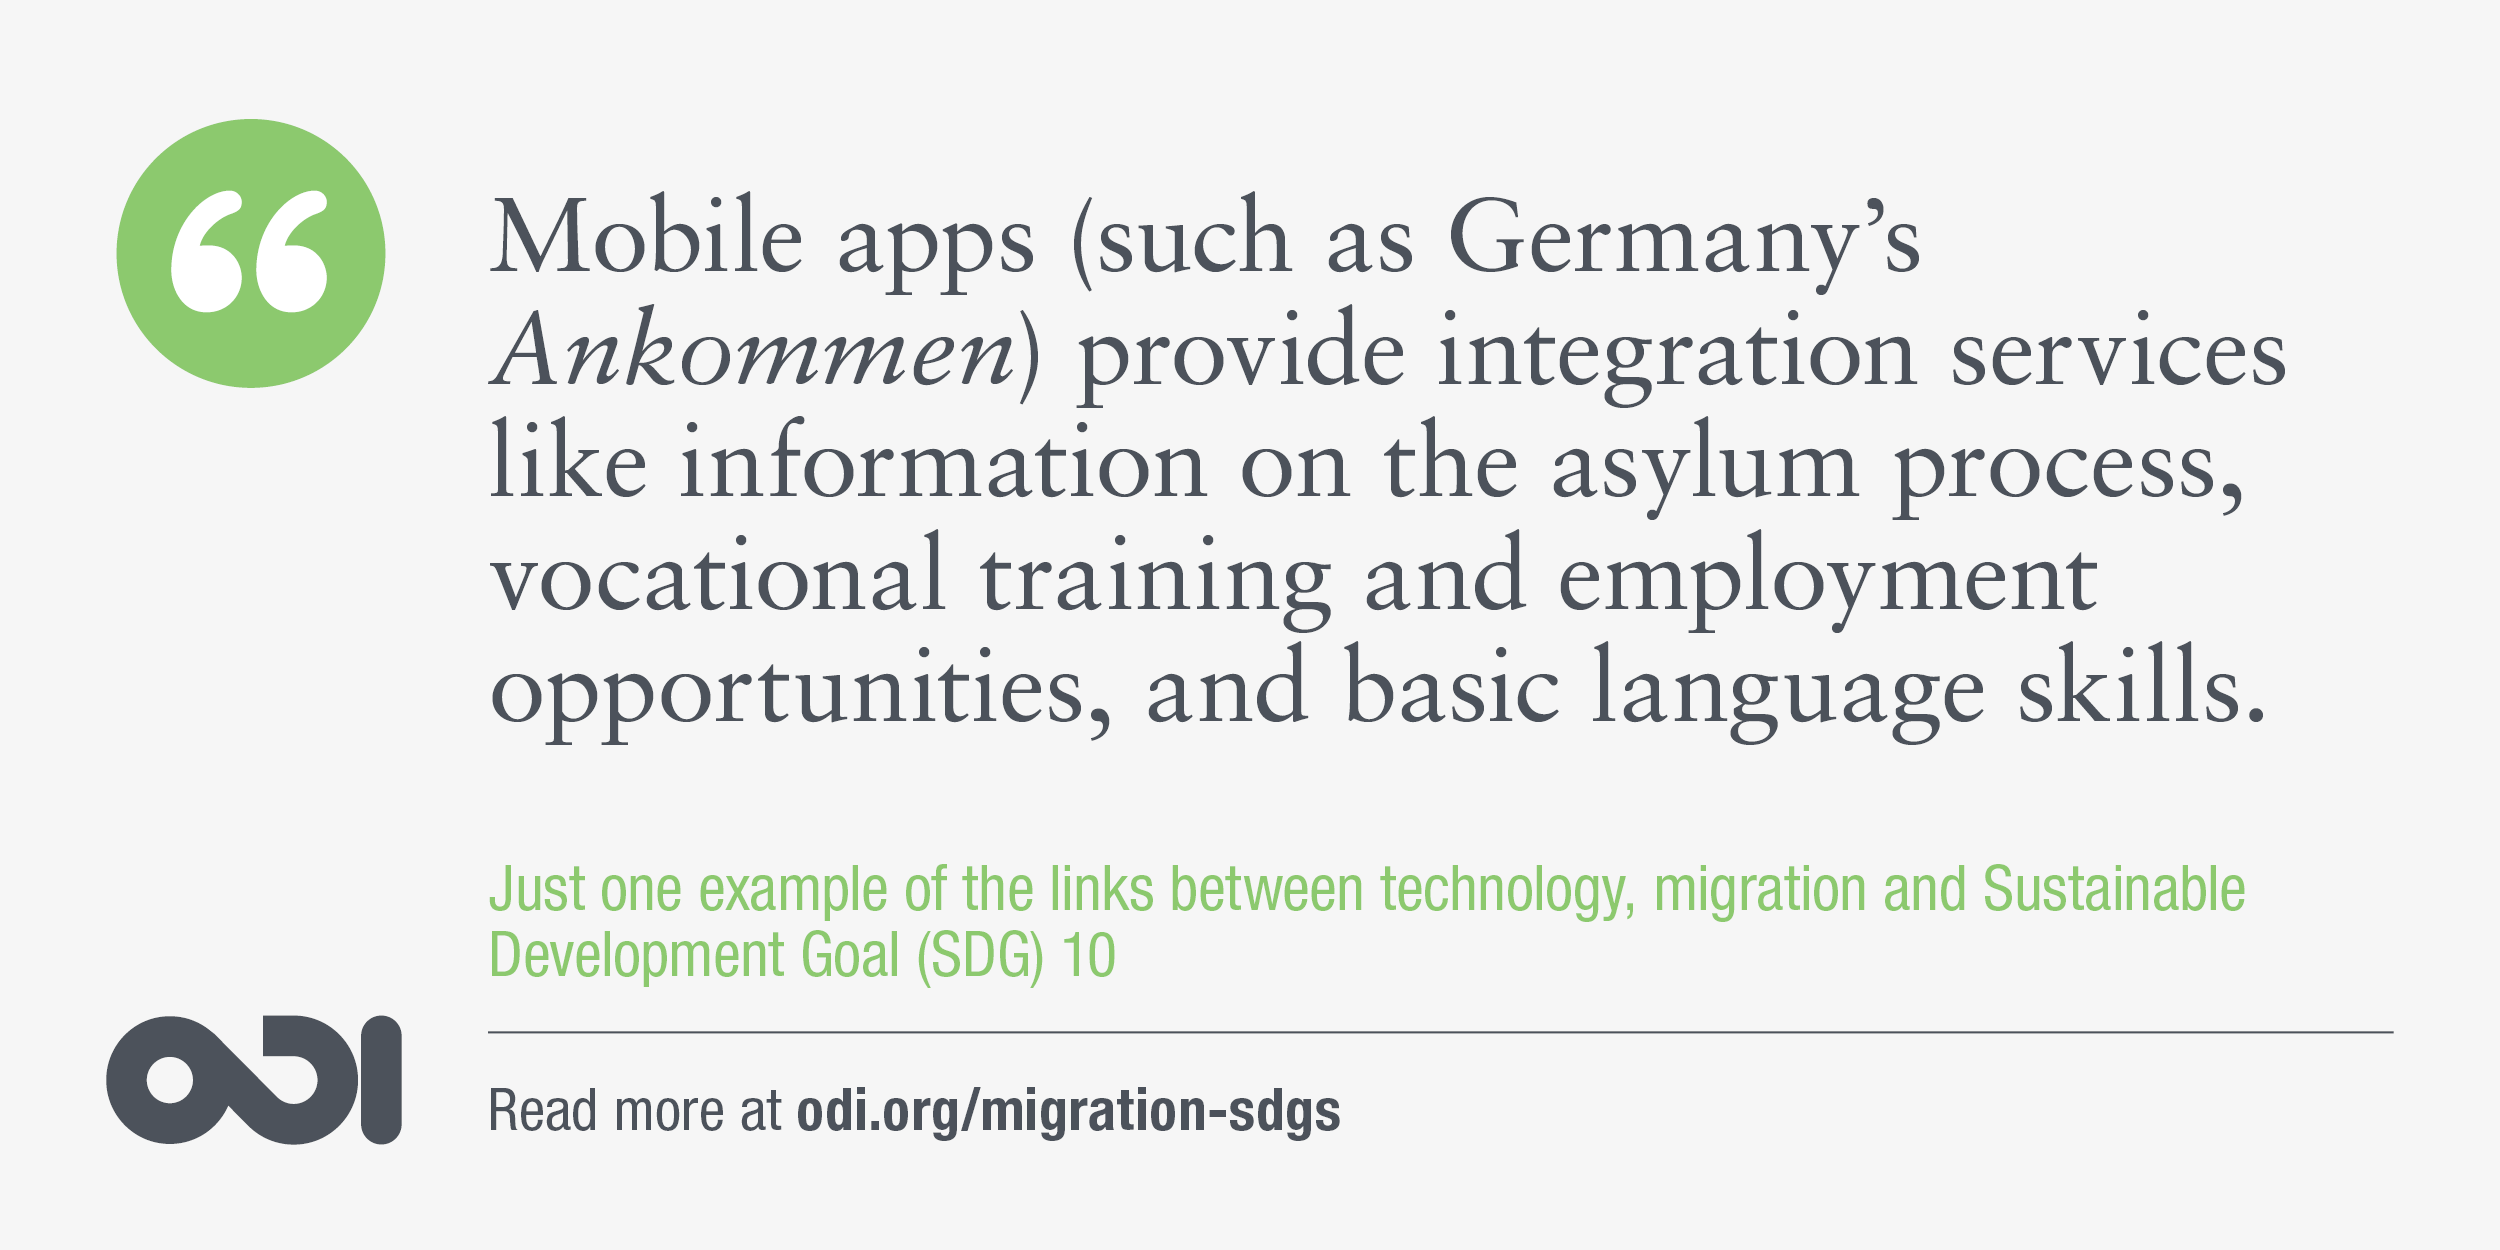 The links between technology, migration and SDG 10. 